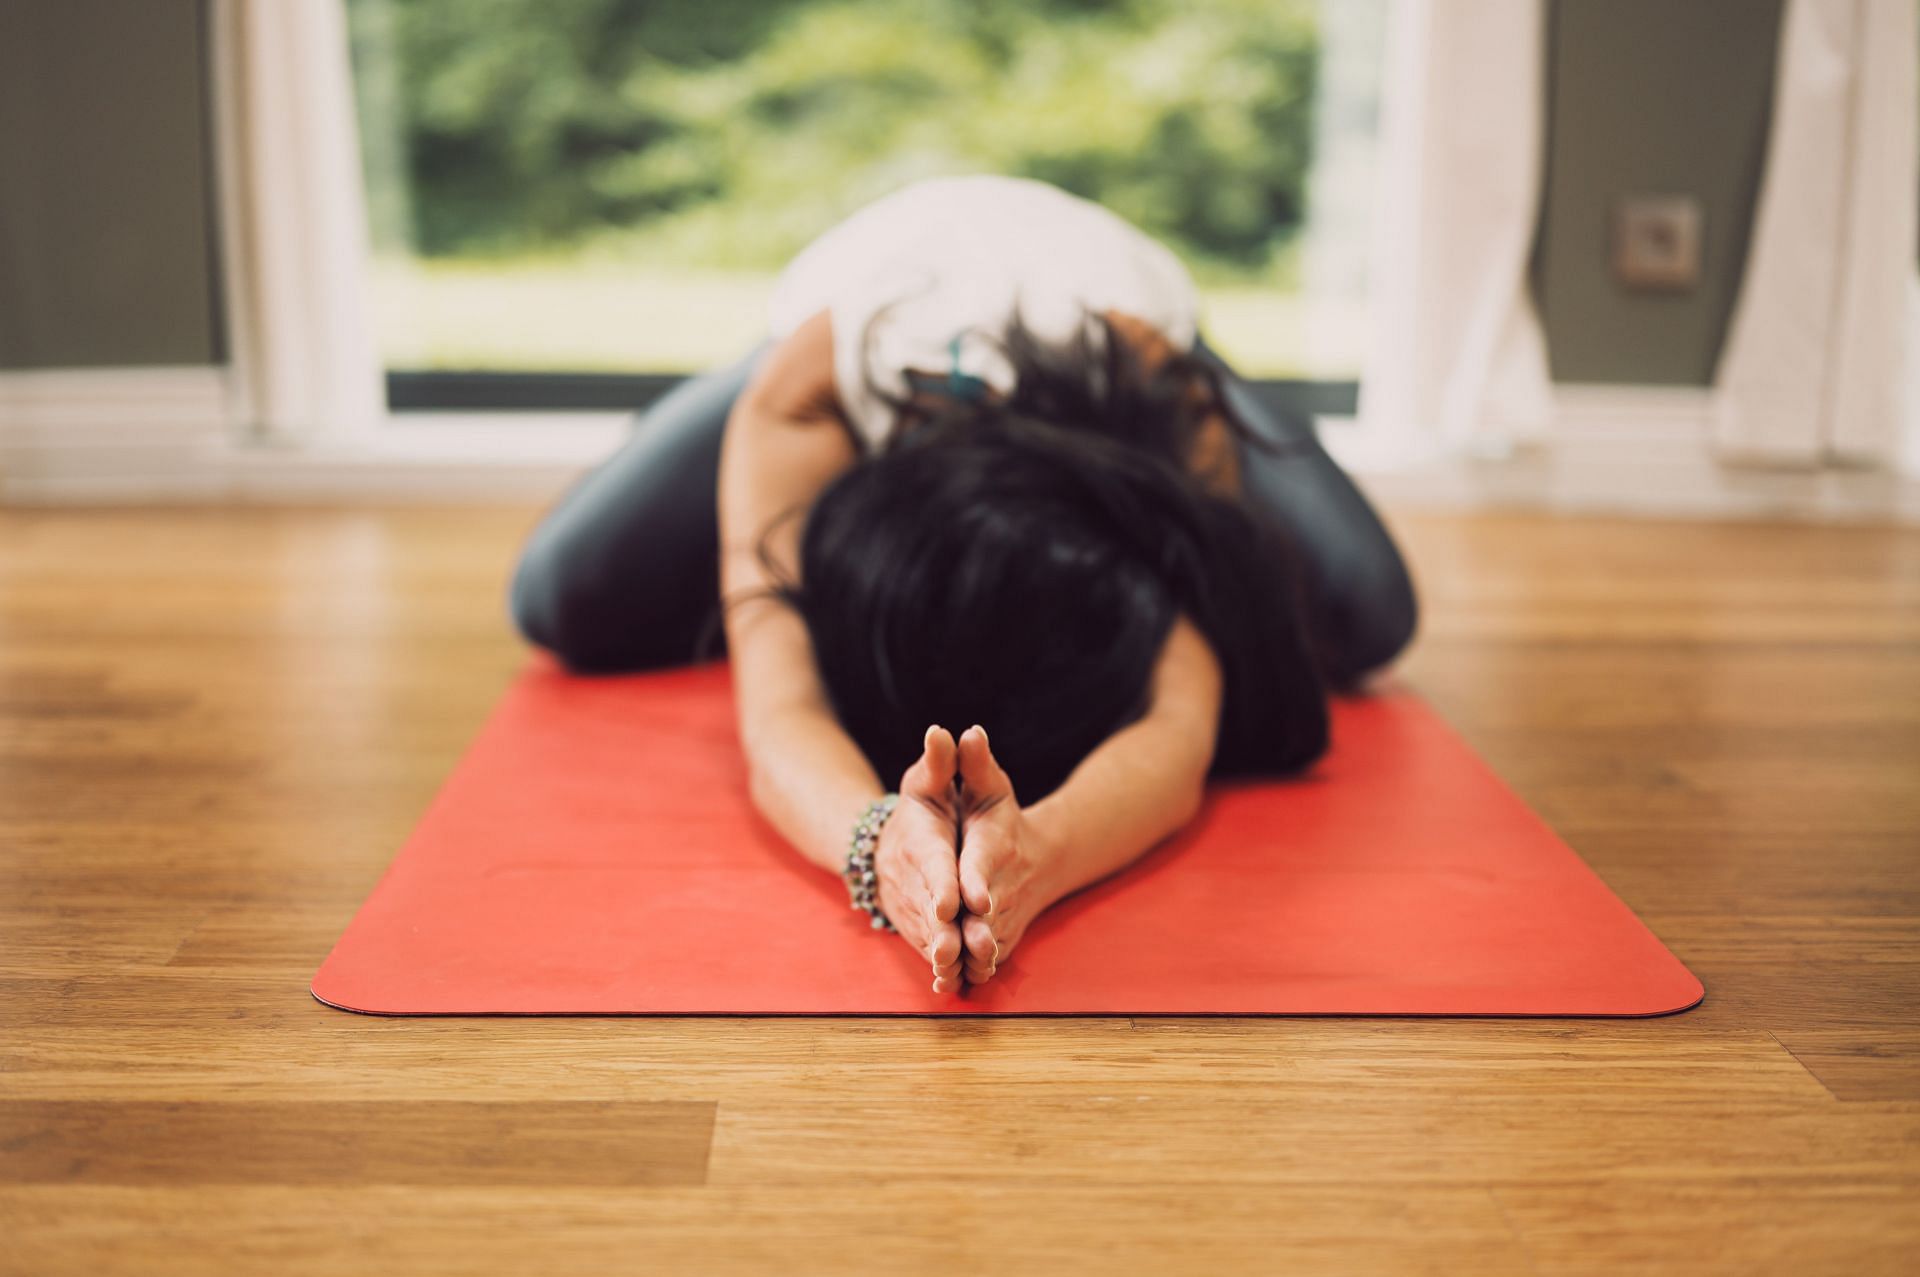 Here are the best yoga exercises to relieve you after a long day! (Image via unsplash/Conscious Design)